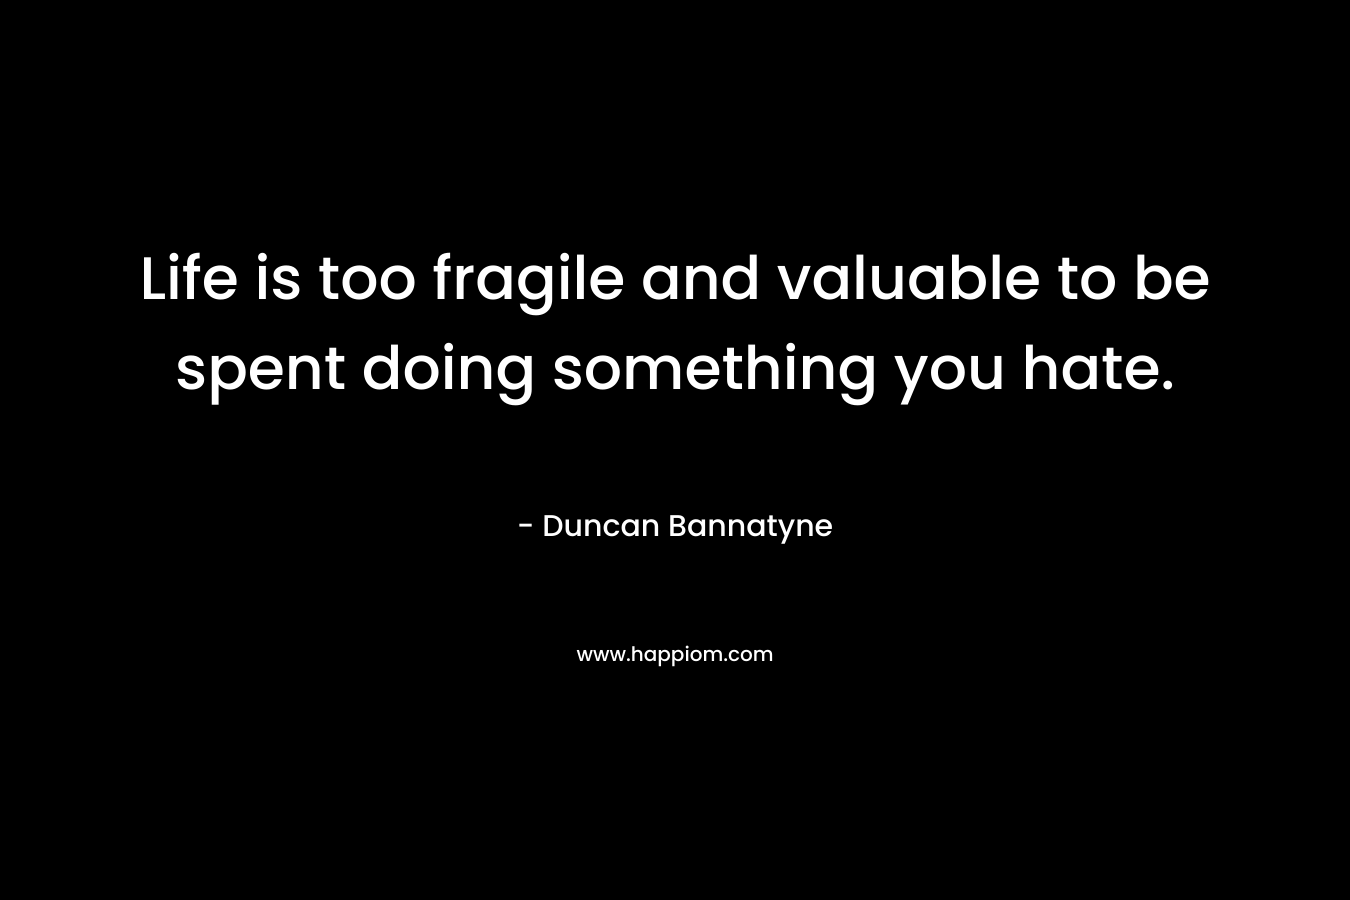 Life is too fragile and valuable to be spent doing something you hate.